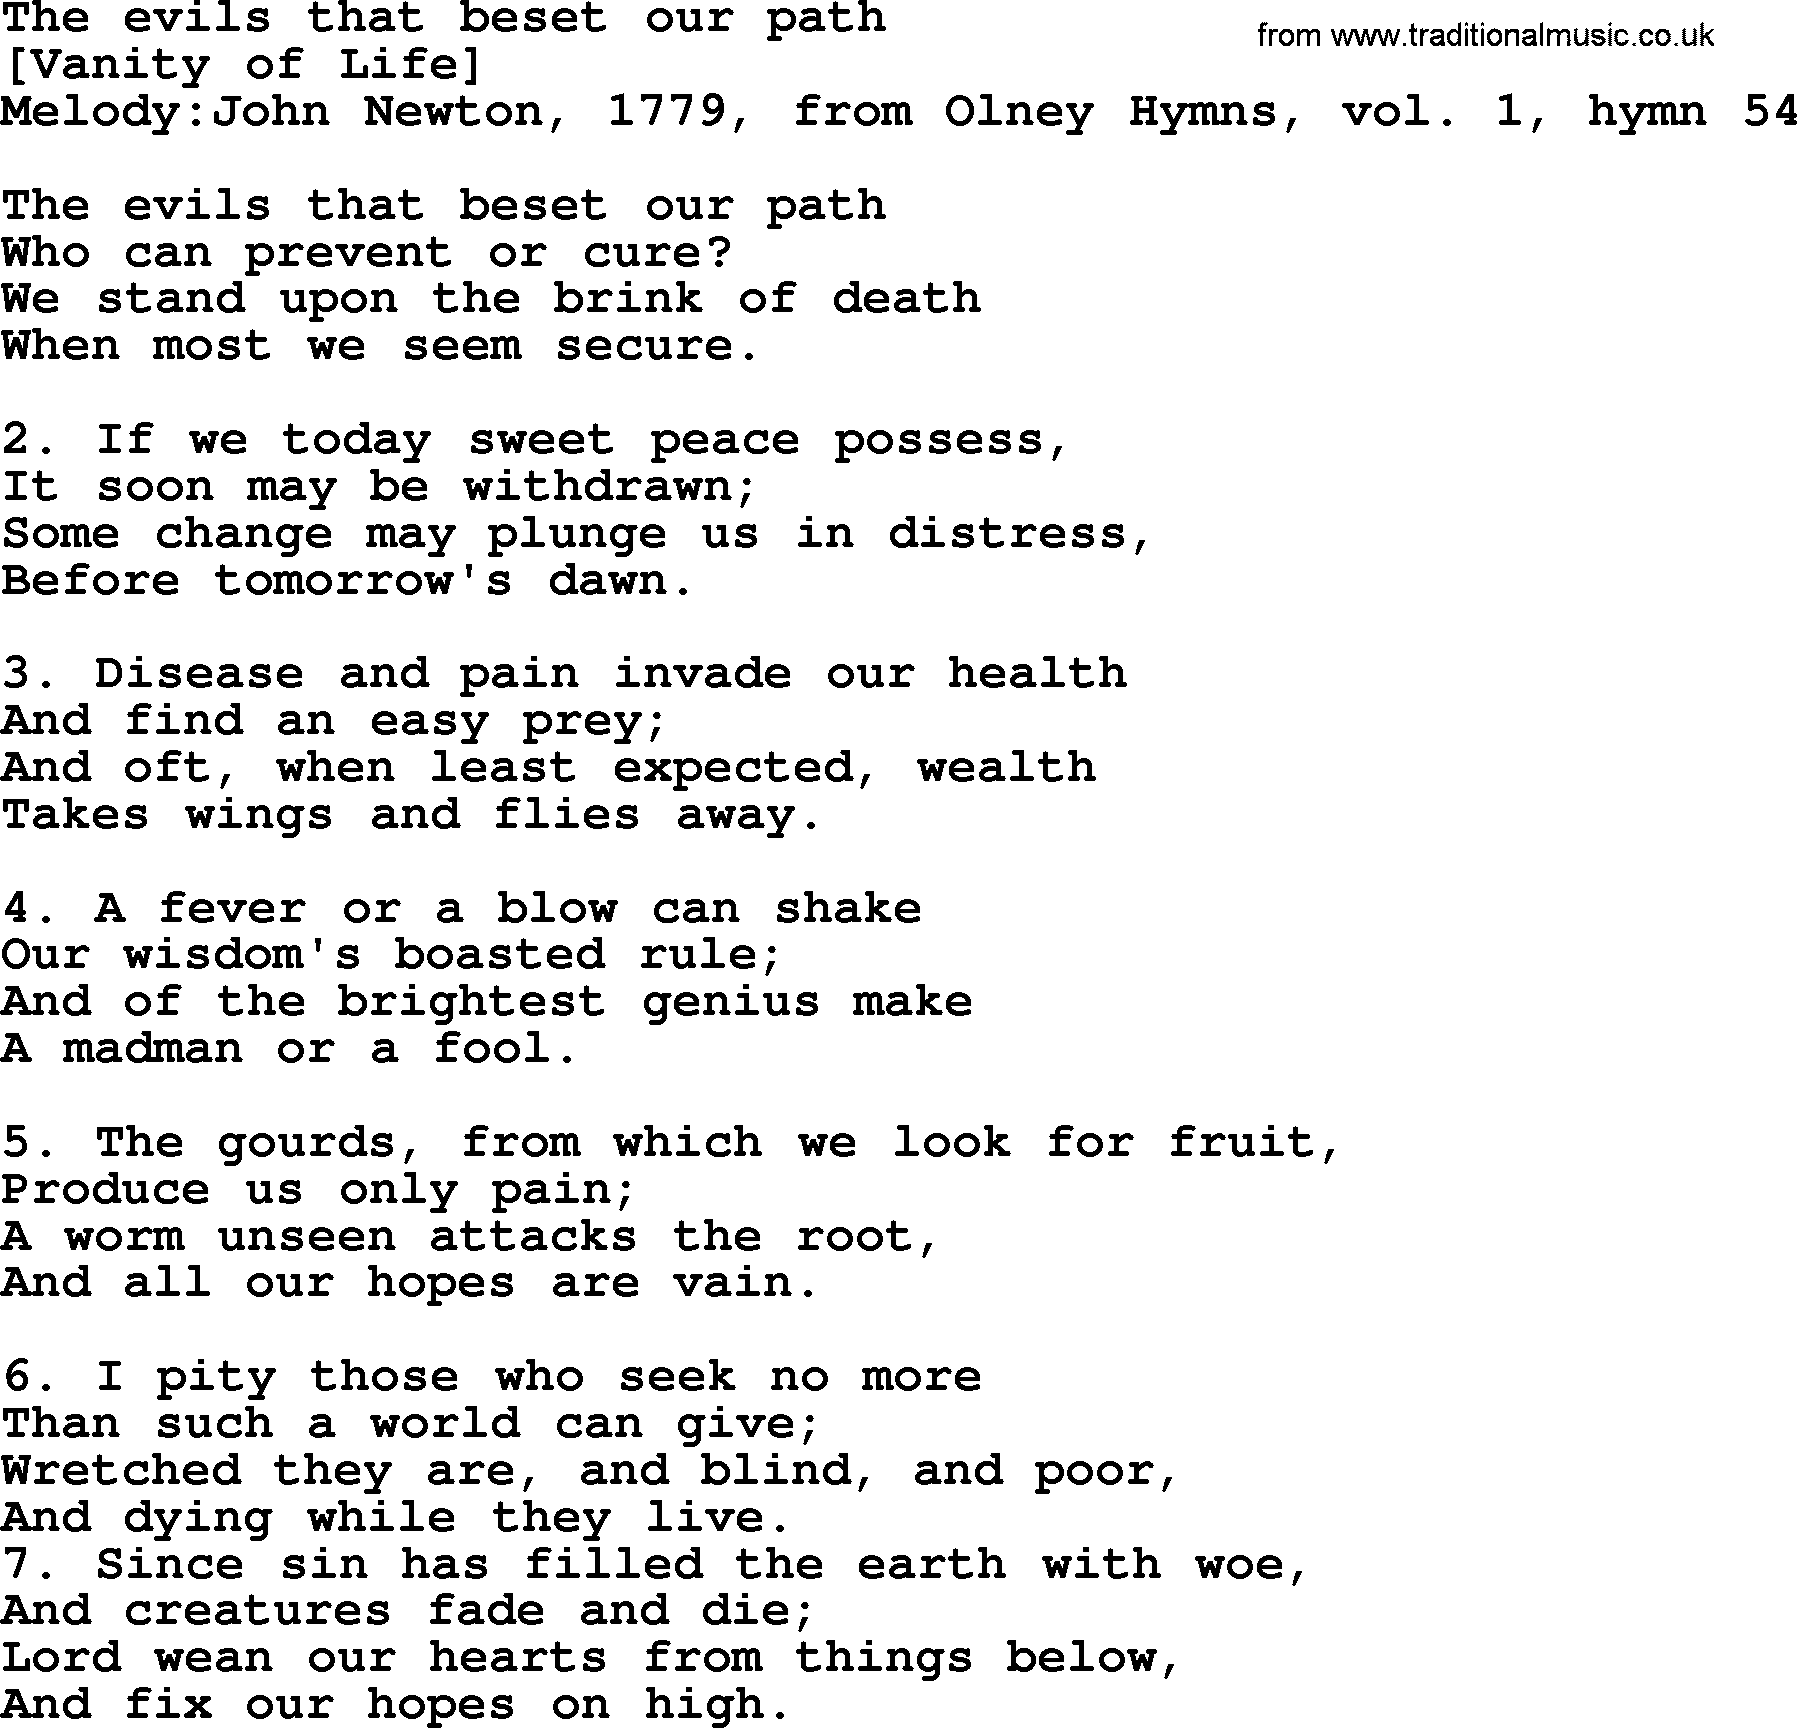 Old English Song: The Evils That Beset Our Path lyrics